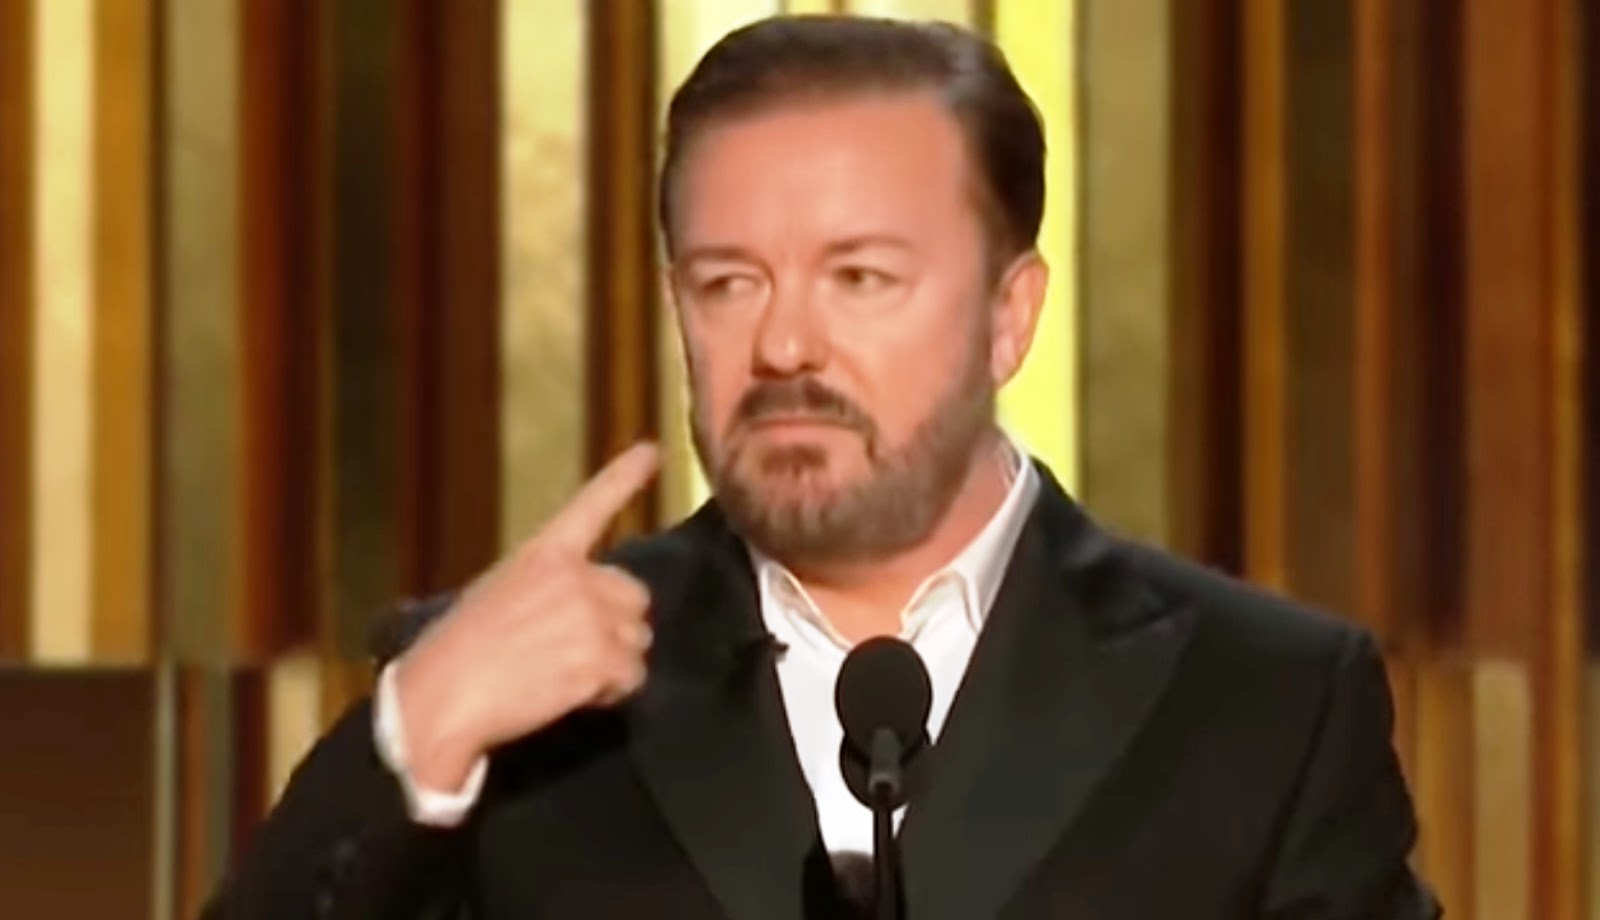 Ricky Gervais' opening monologue